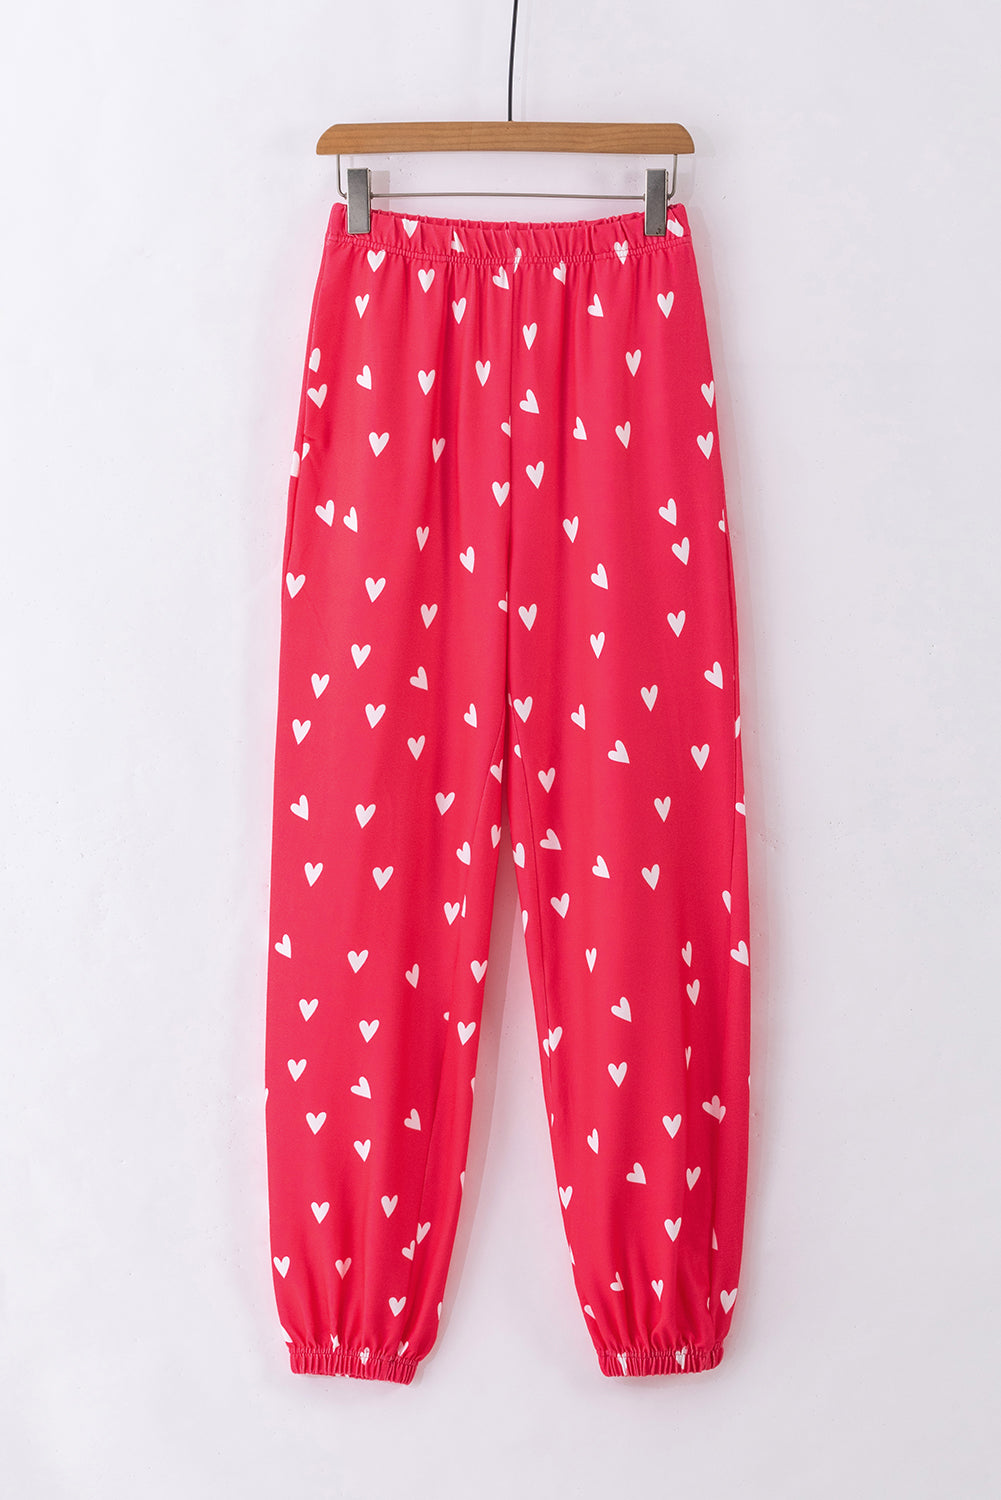 Fiery Red Valentines Heart Print Pants Set